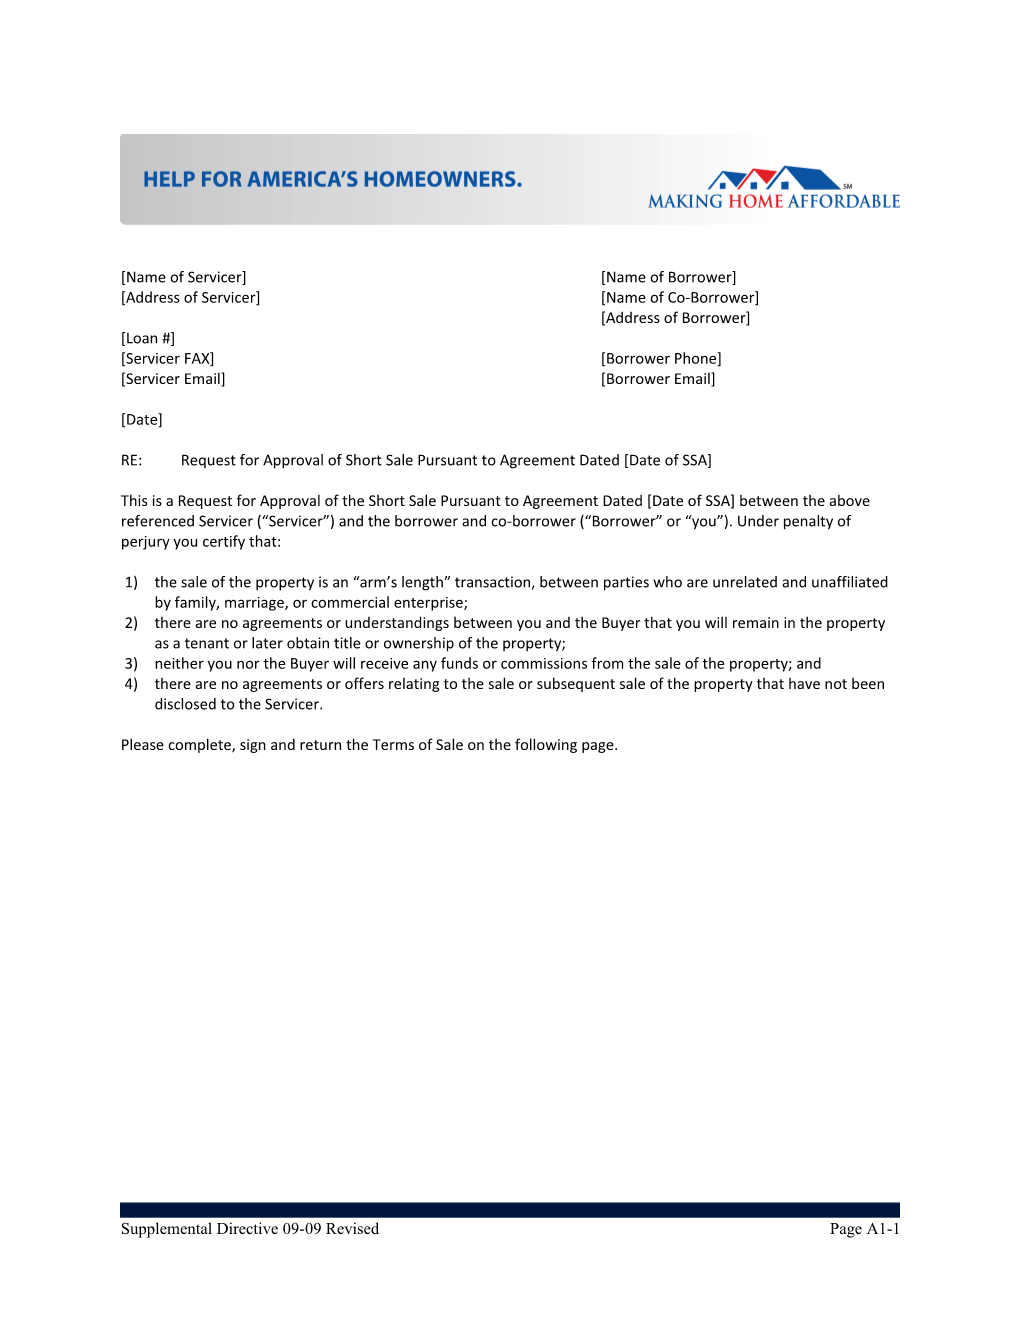 Request for Approval of Short Sale